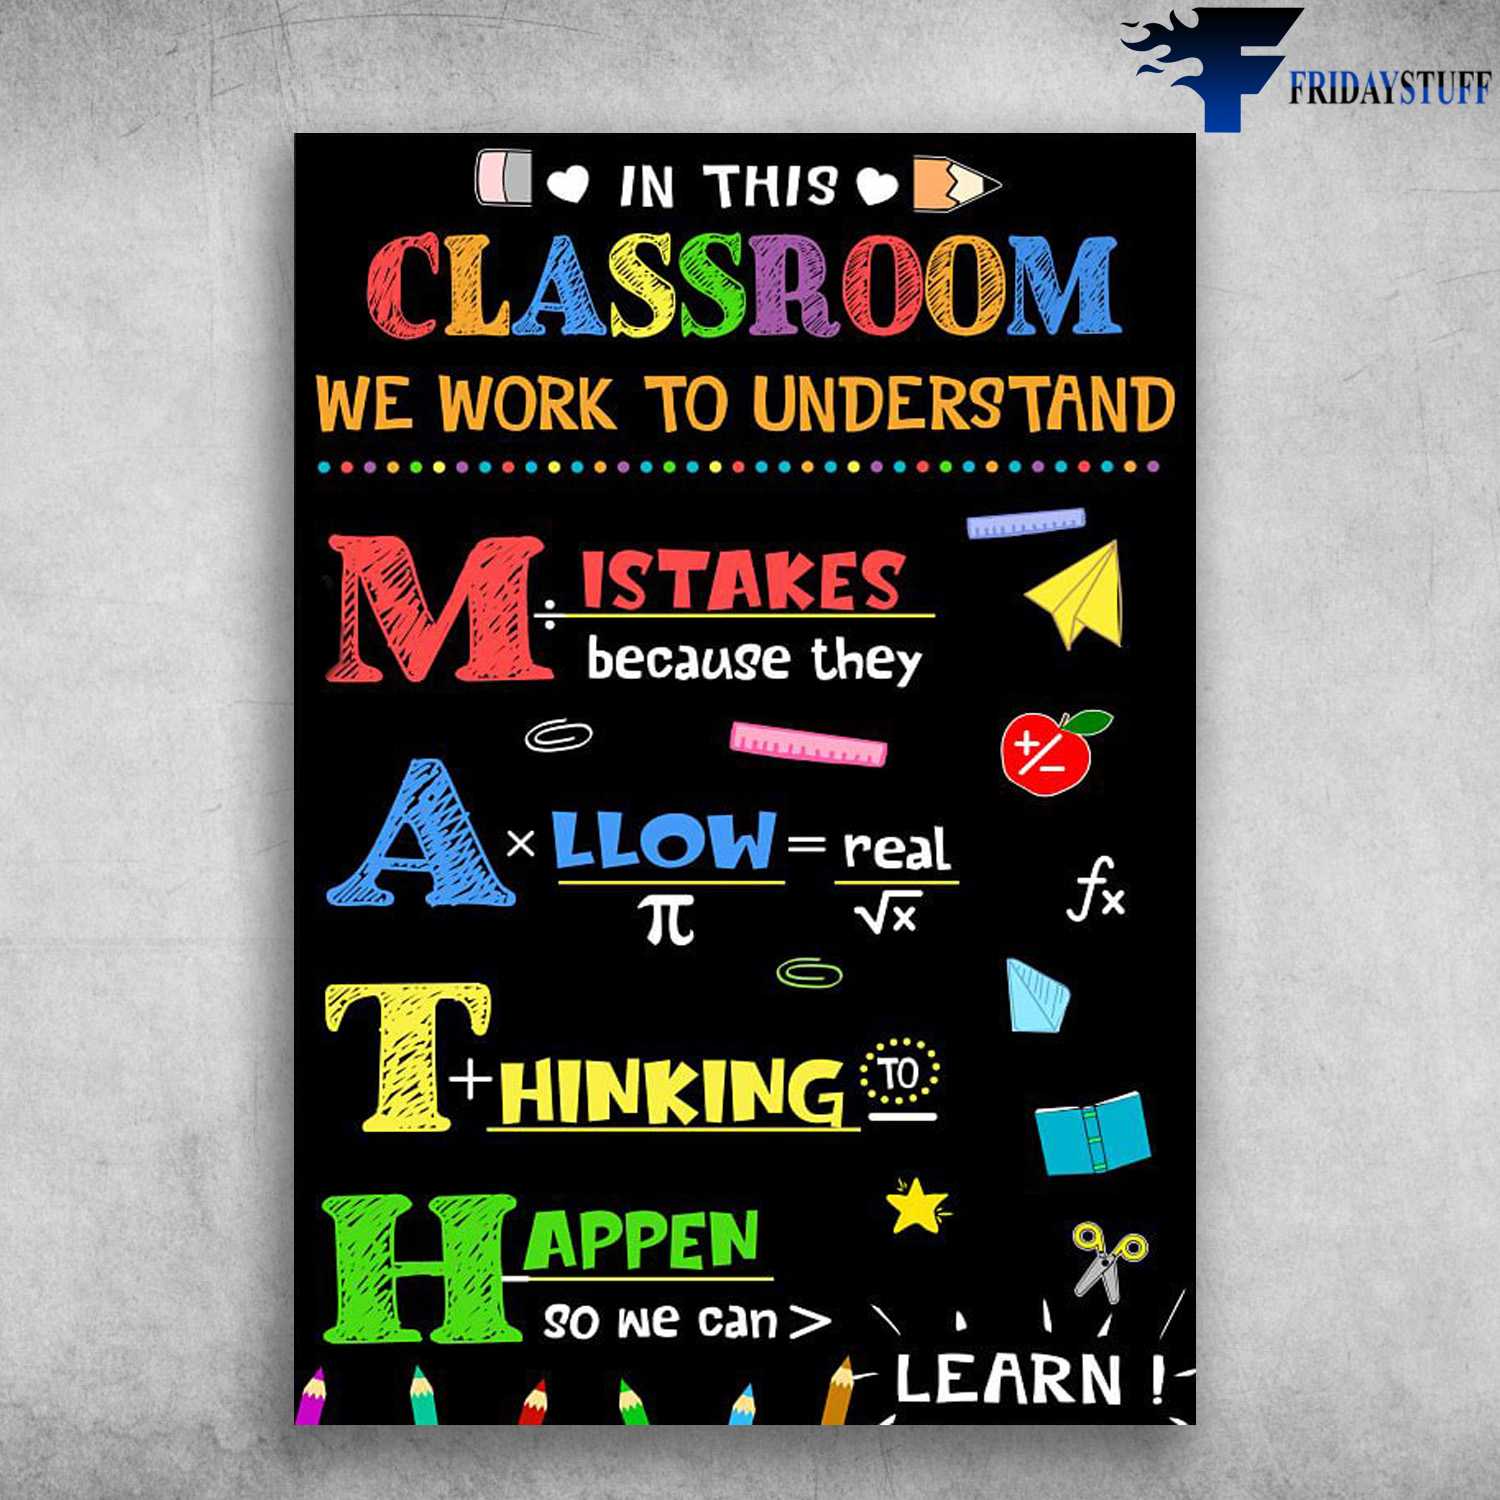 Classroom Rules - In This Classroom, We Work To Understand, Mistakes Because They, Allow Thinking Happen, So We Can Learn